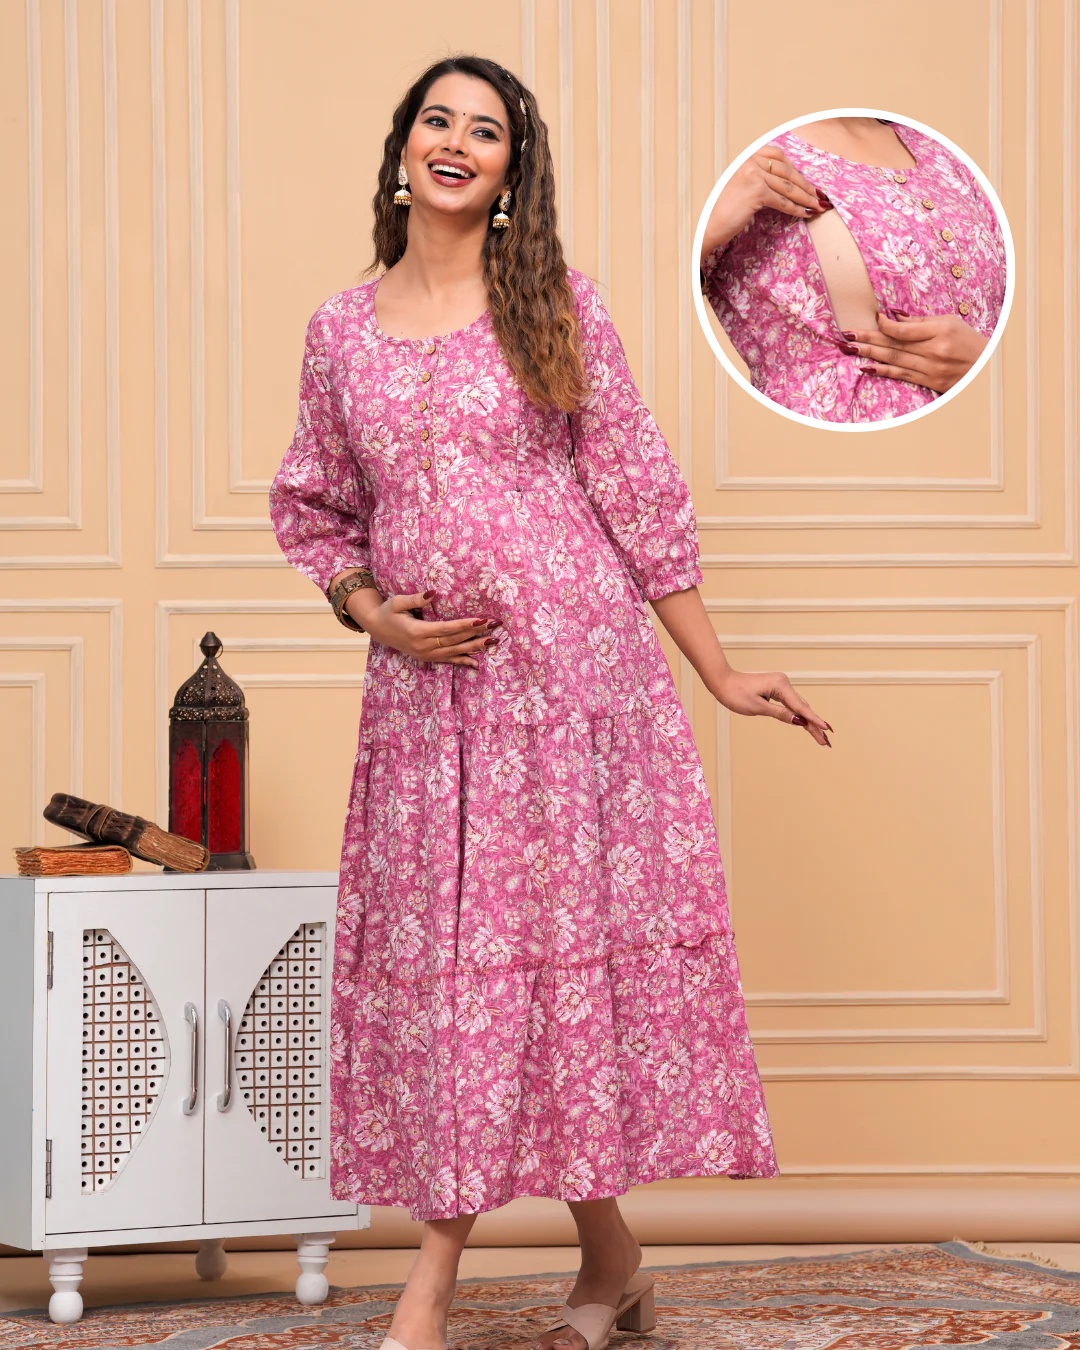 Know About Some Comfortable Patterns for Pregnancy Dresses